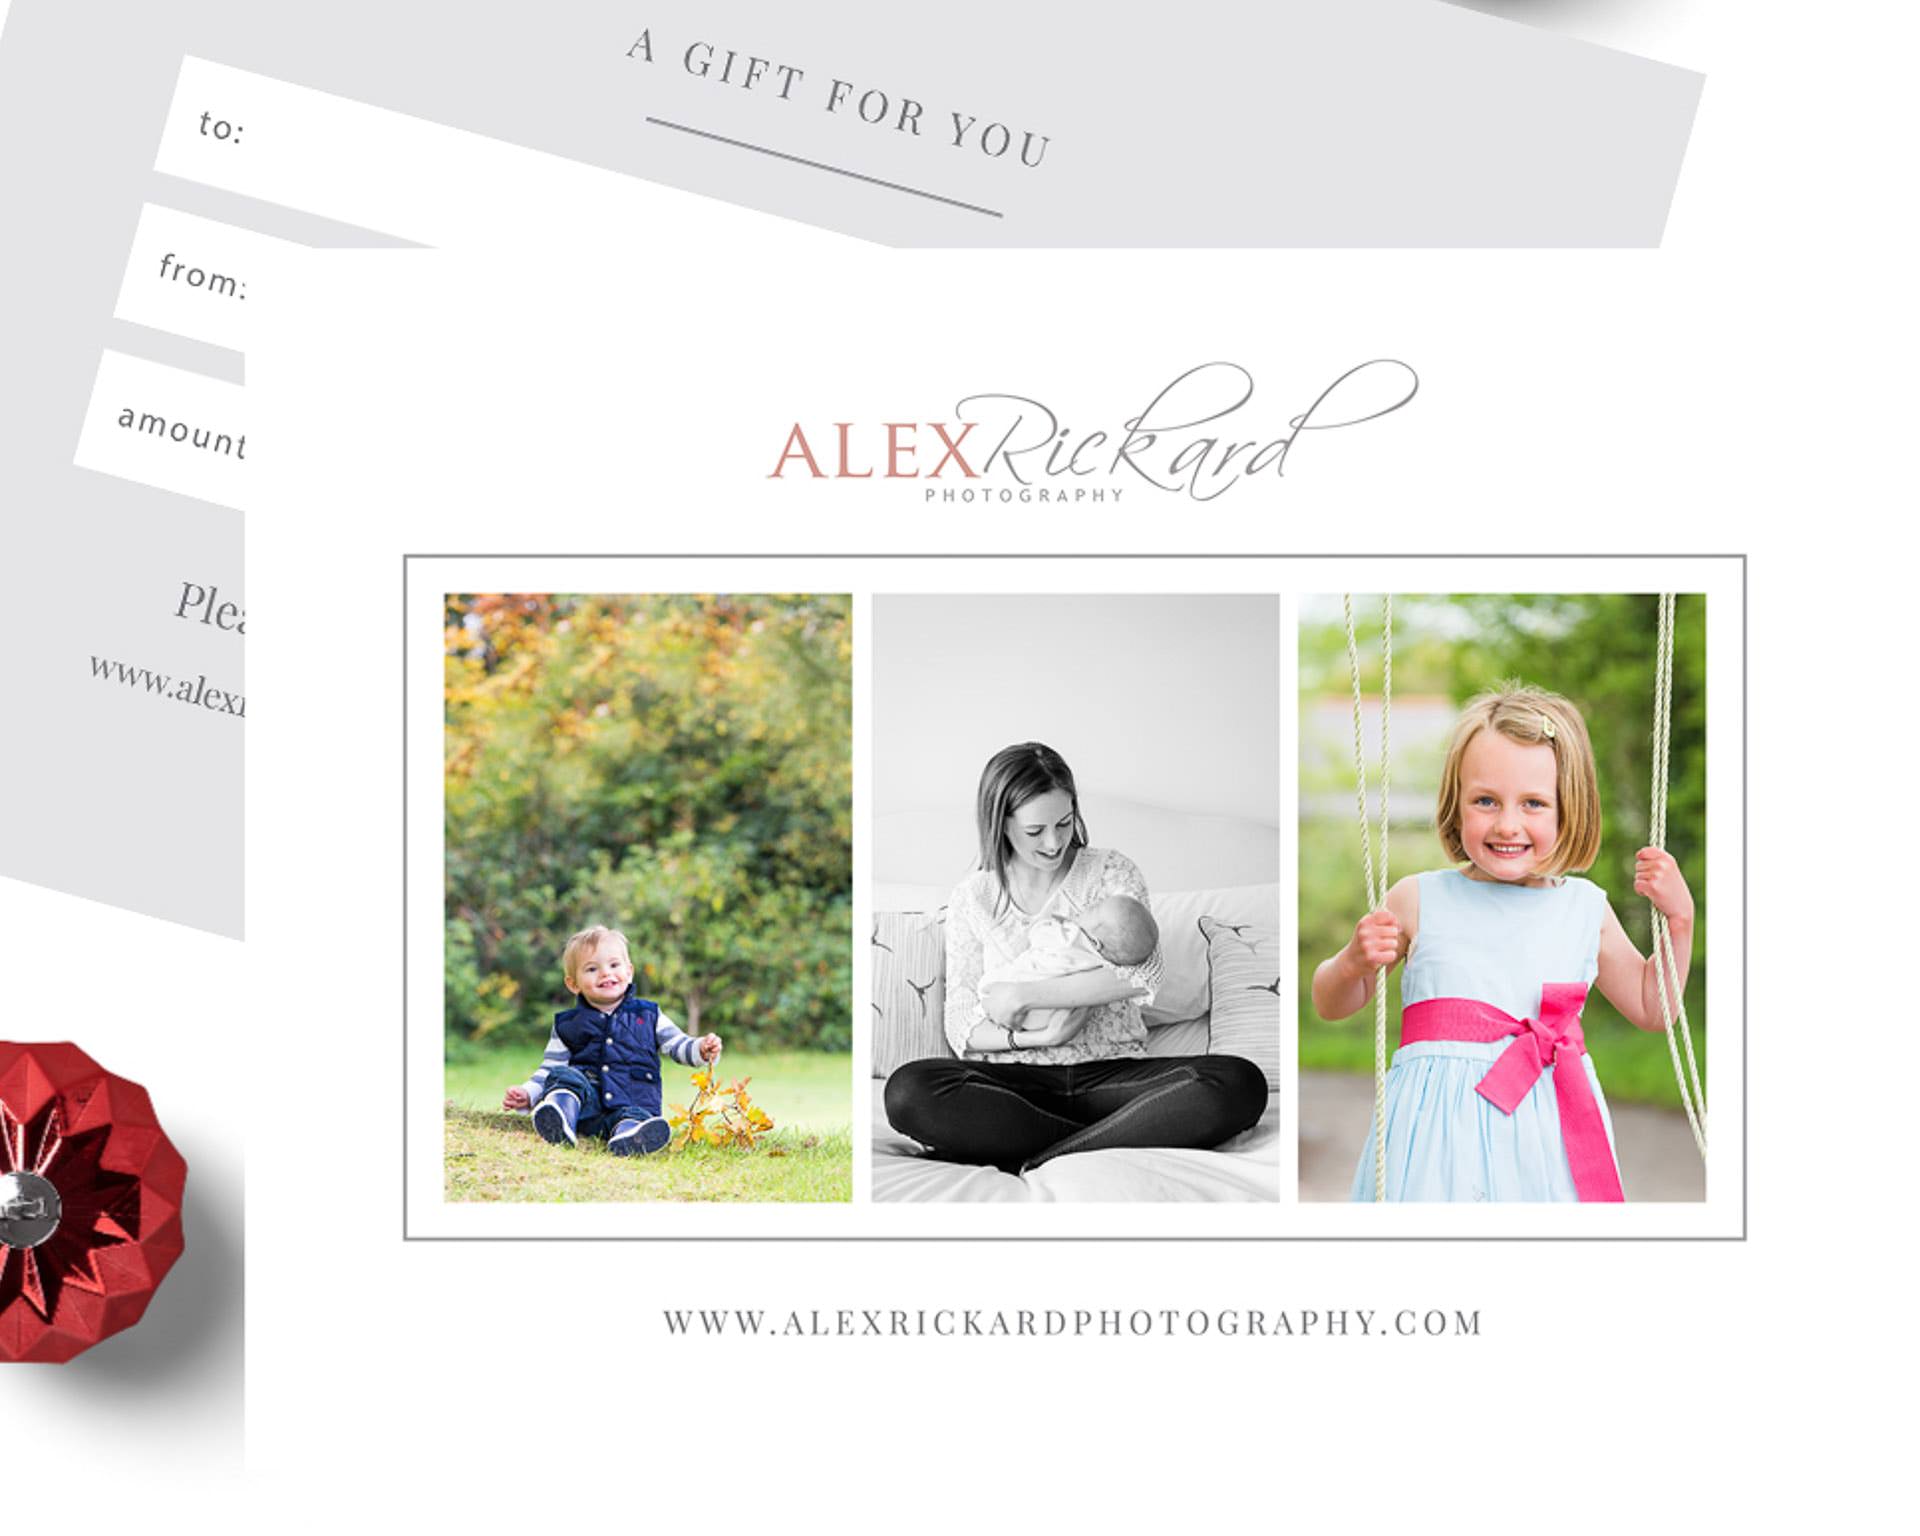 flatly picture of a photoshoot gift voucher